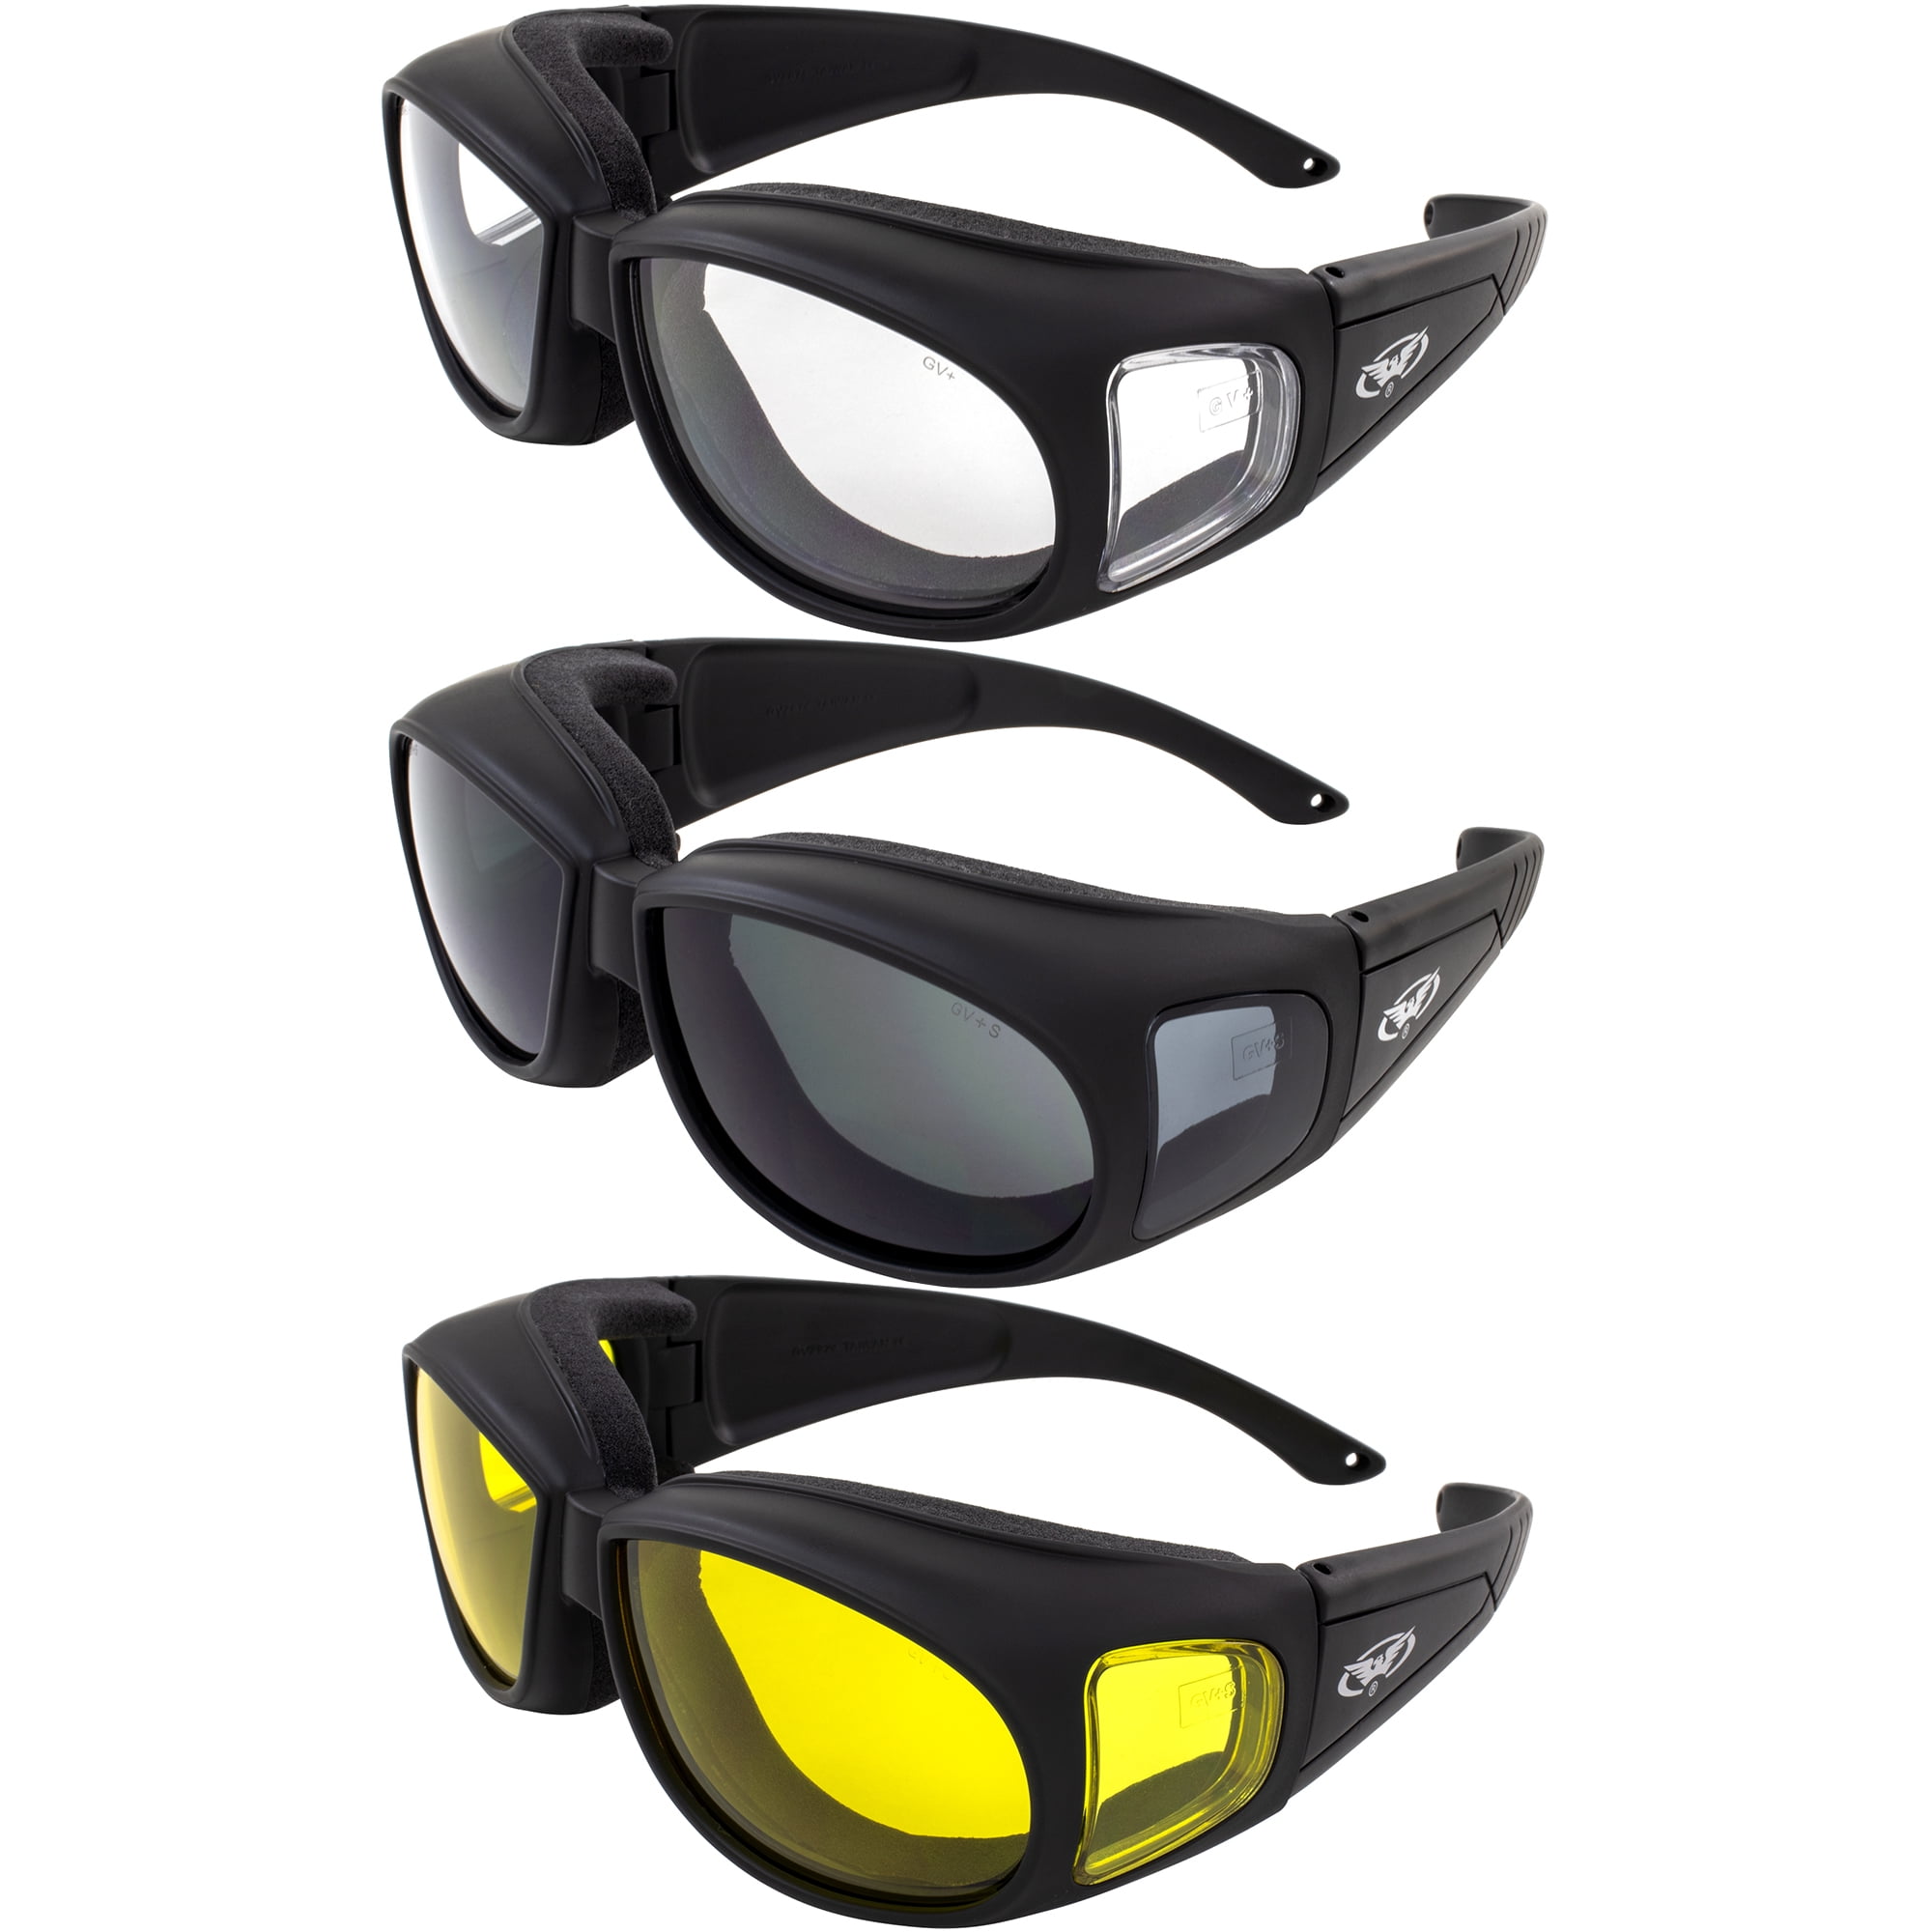 Rider Silver Mirror Lens Black Safety Glasses Sunglasses Motorcycle Z87+ 